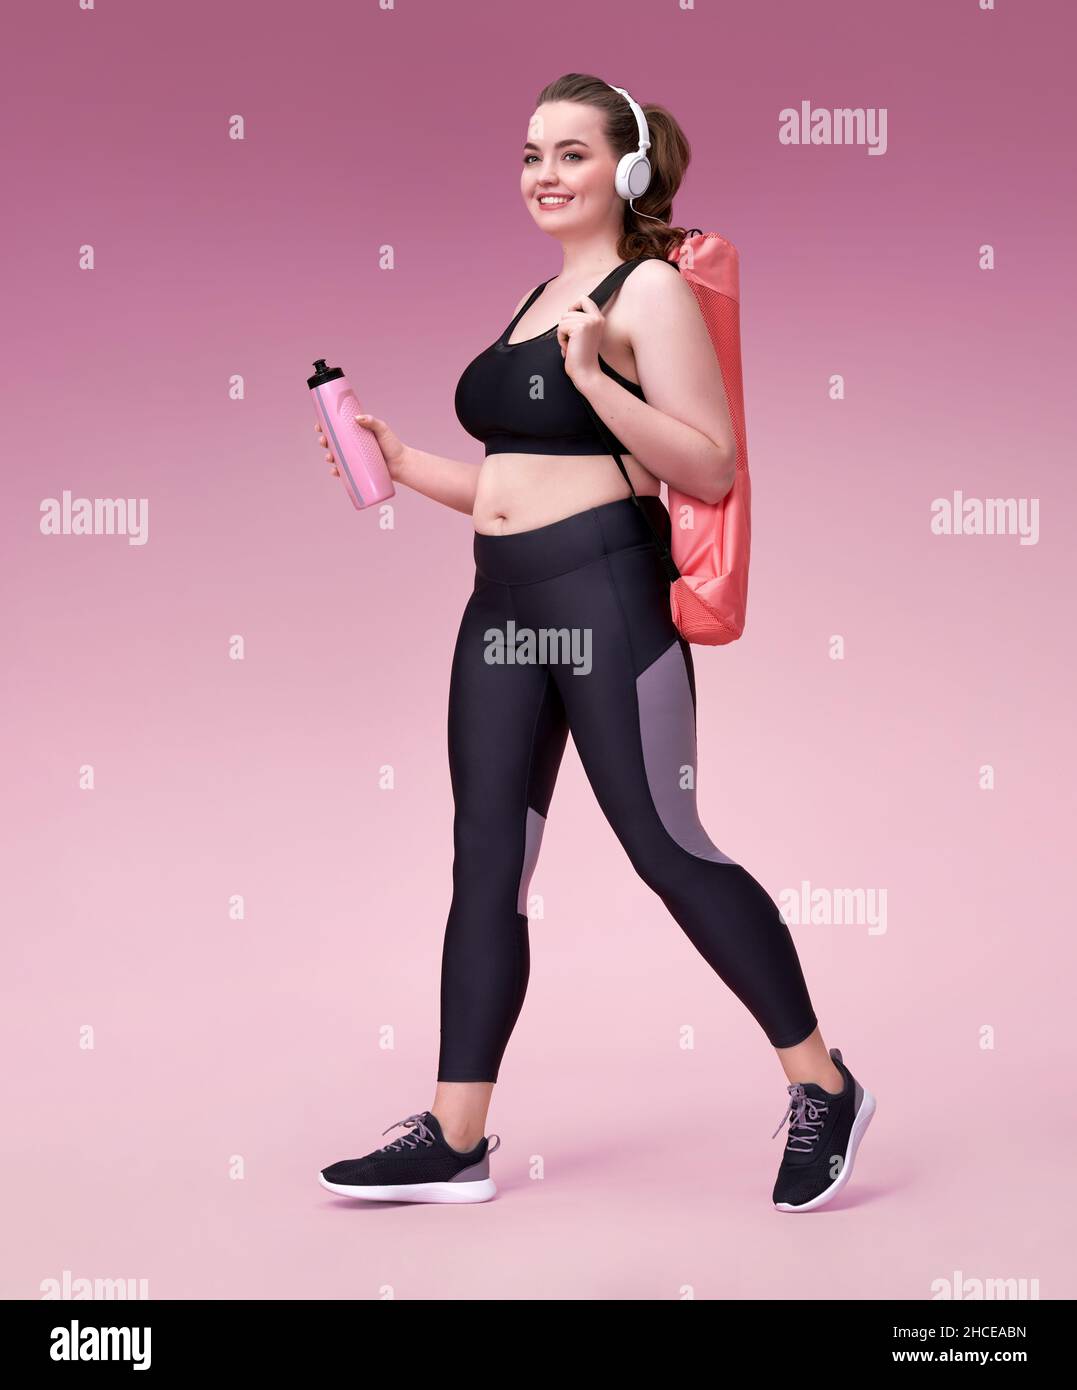 Go to training! Smiling sporty woman with yoga mat and bottle of water. Photo of model with curvy figure in fashionable sportswear on pink background. Stock Photo